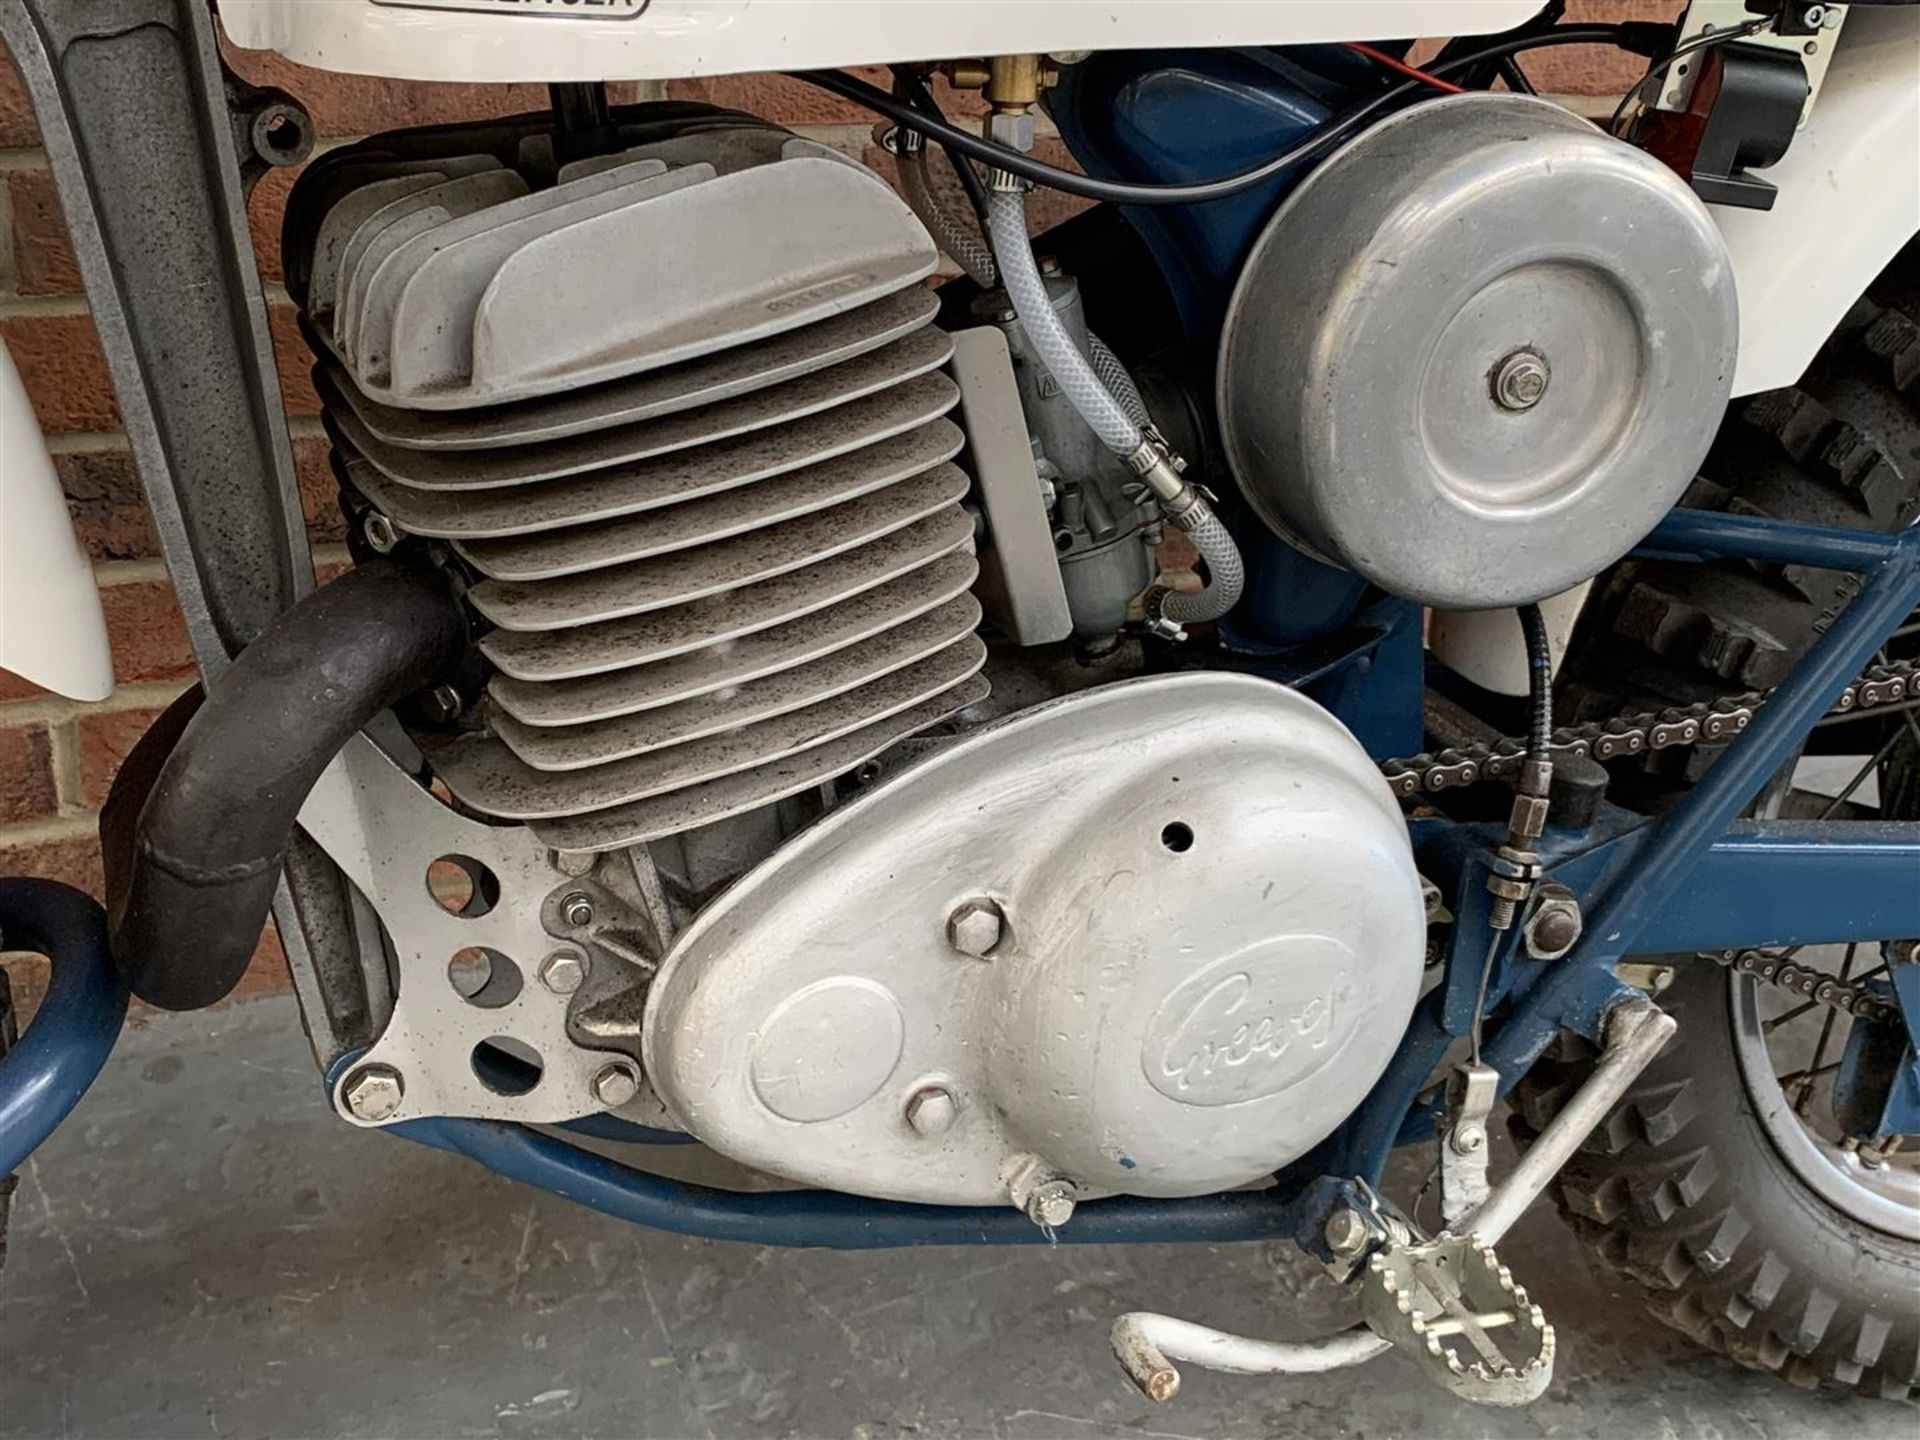 1965 Greeves Challenger 250cc - Image 2 of 13